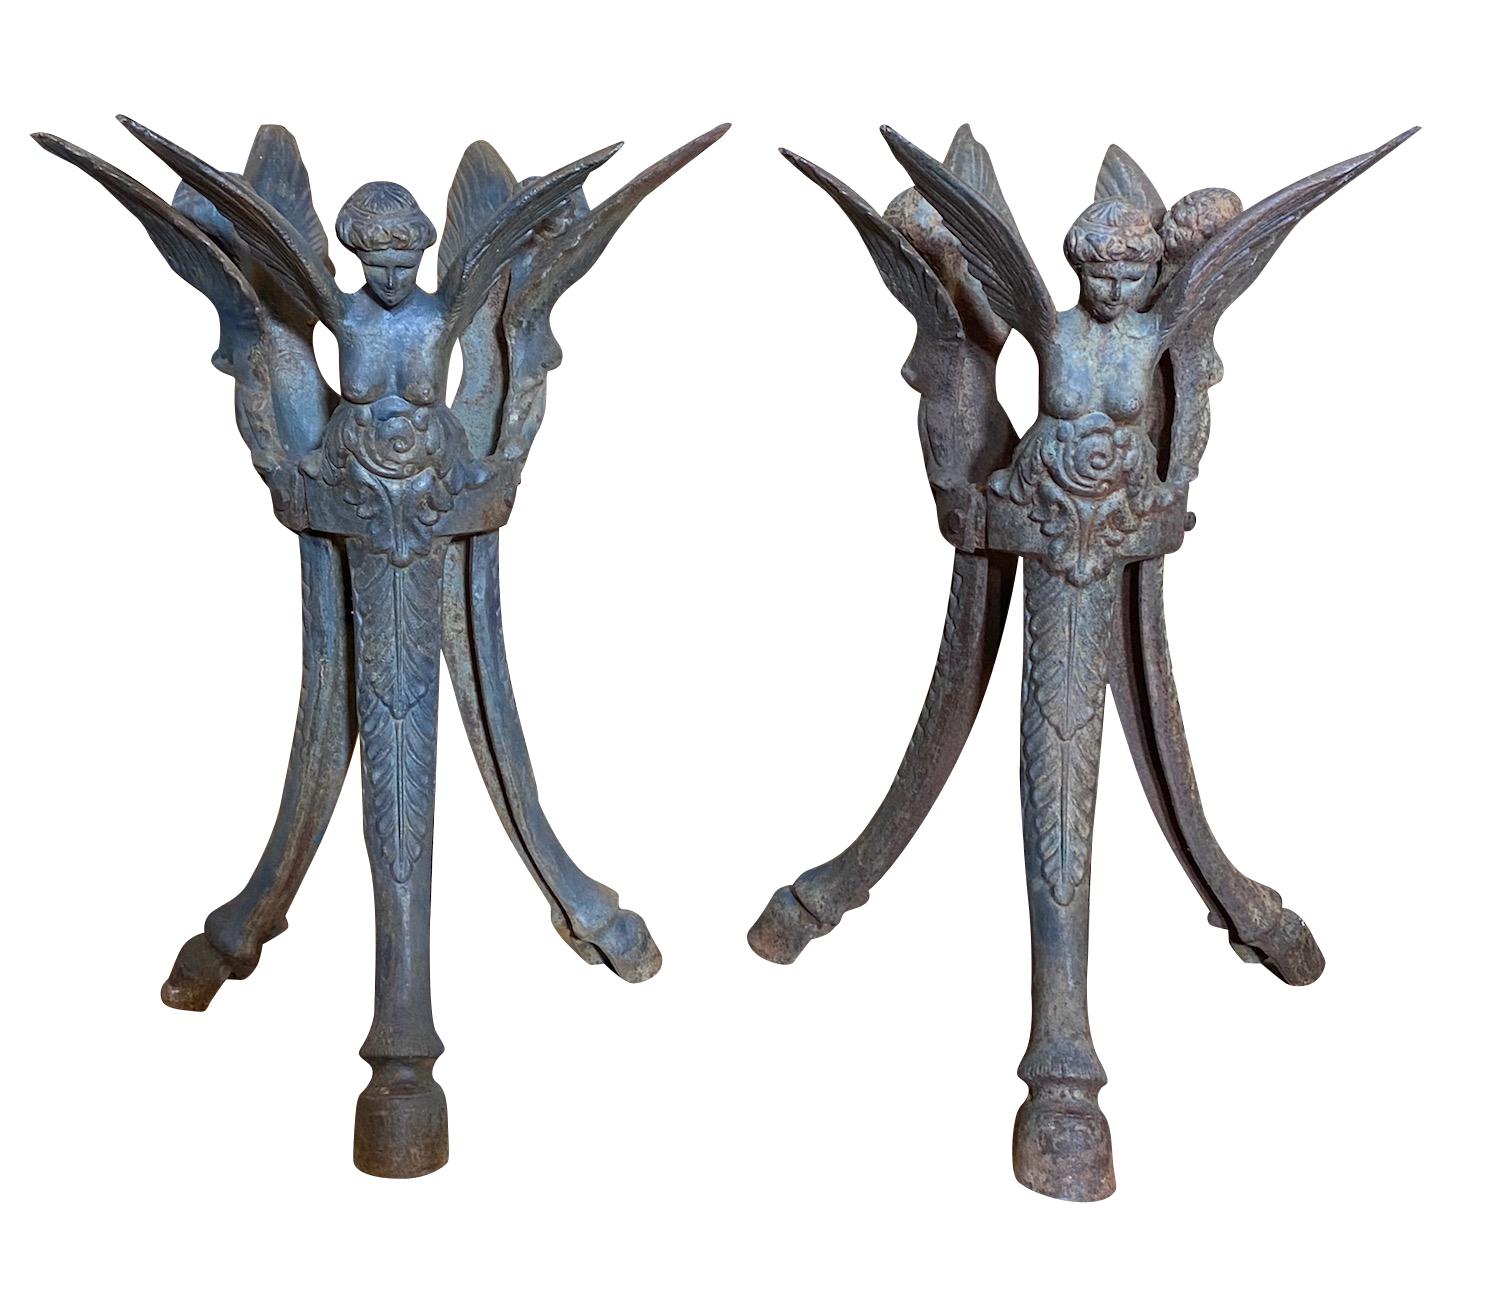 Pair of French Antique Wrought Iron Figural End Tables, Circa 1900
Having a dark patina with three winged cherubs and hooved feet 